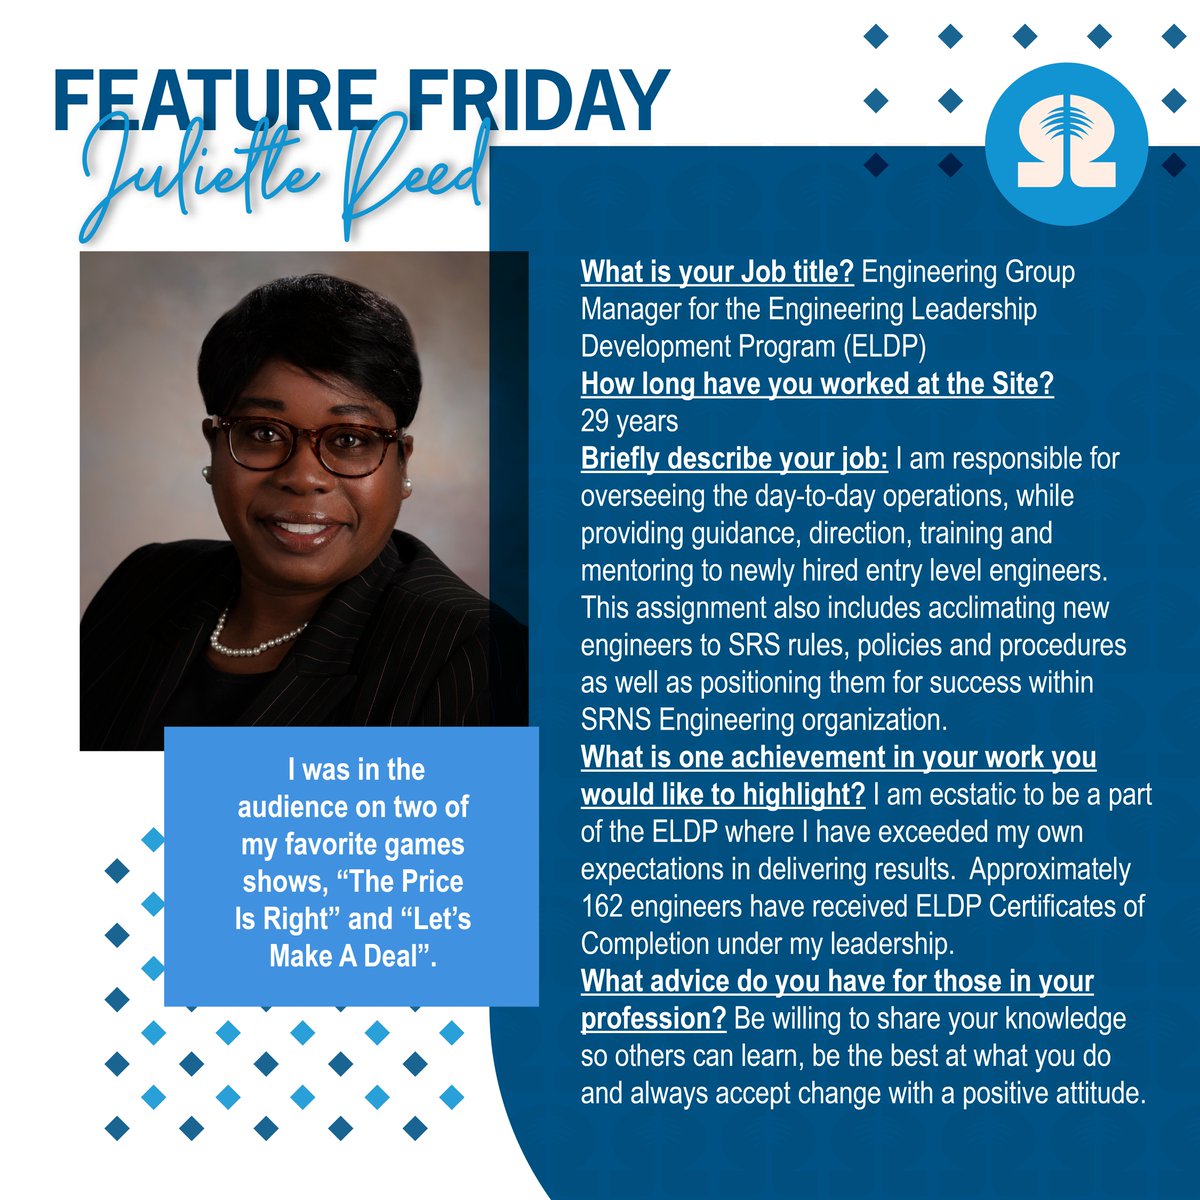 It's #FeatureFriday! Meet the Engineering Group manager for the Engineering Leadership Development Program, Juliette Reed. Thank you for helping us #MakeTheWorldSafer, Juliette!